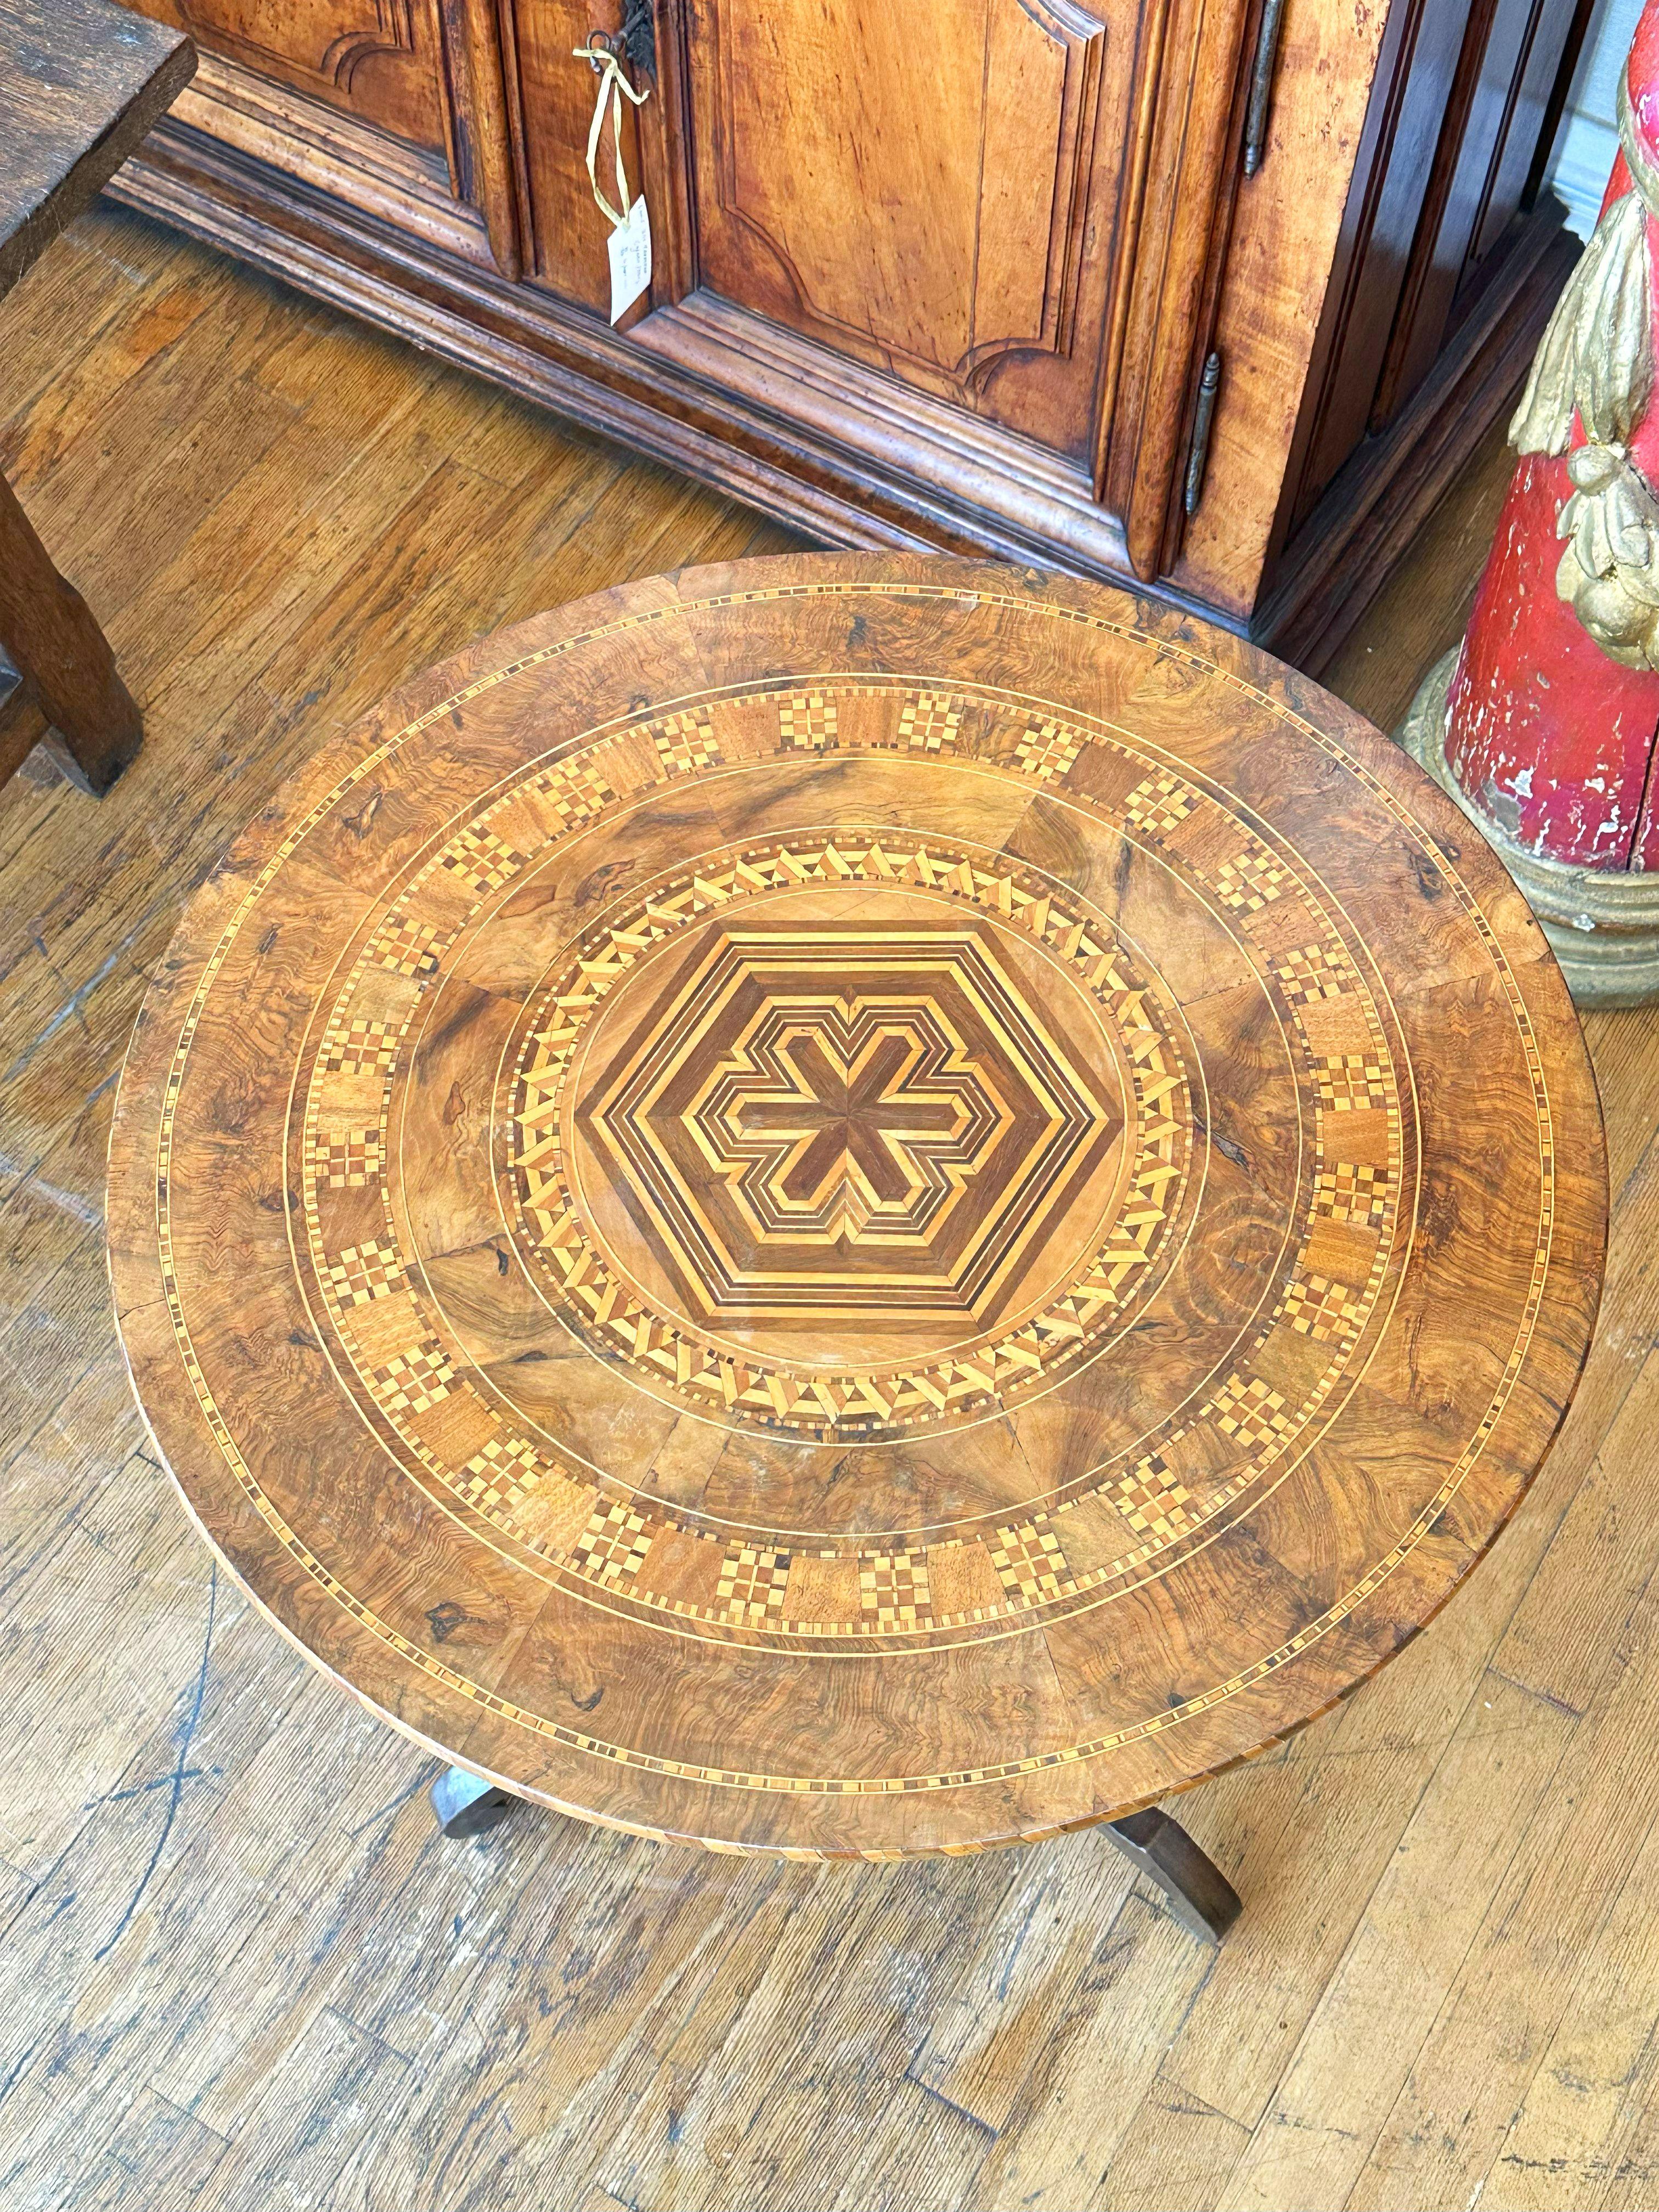 Circular marquetry inlaid top raised on a baluster turned support resting on a tripartite base with slightly under scrolled feet. 